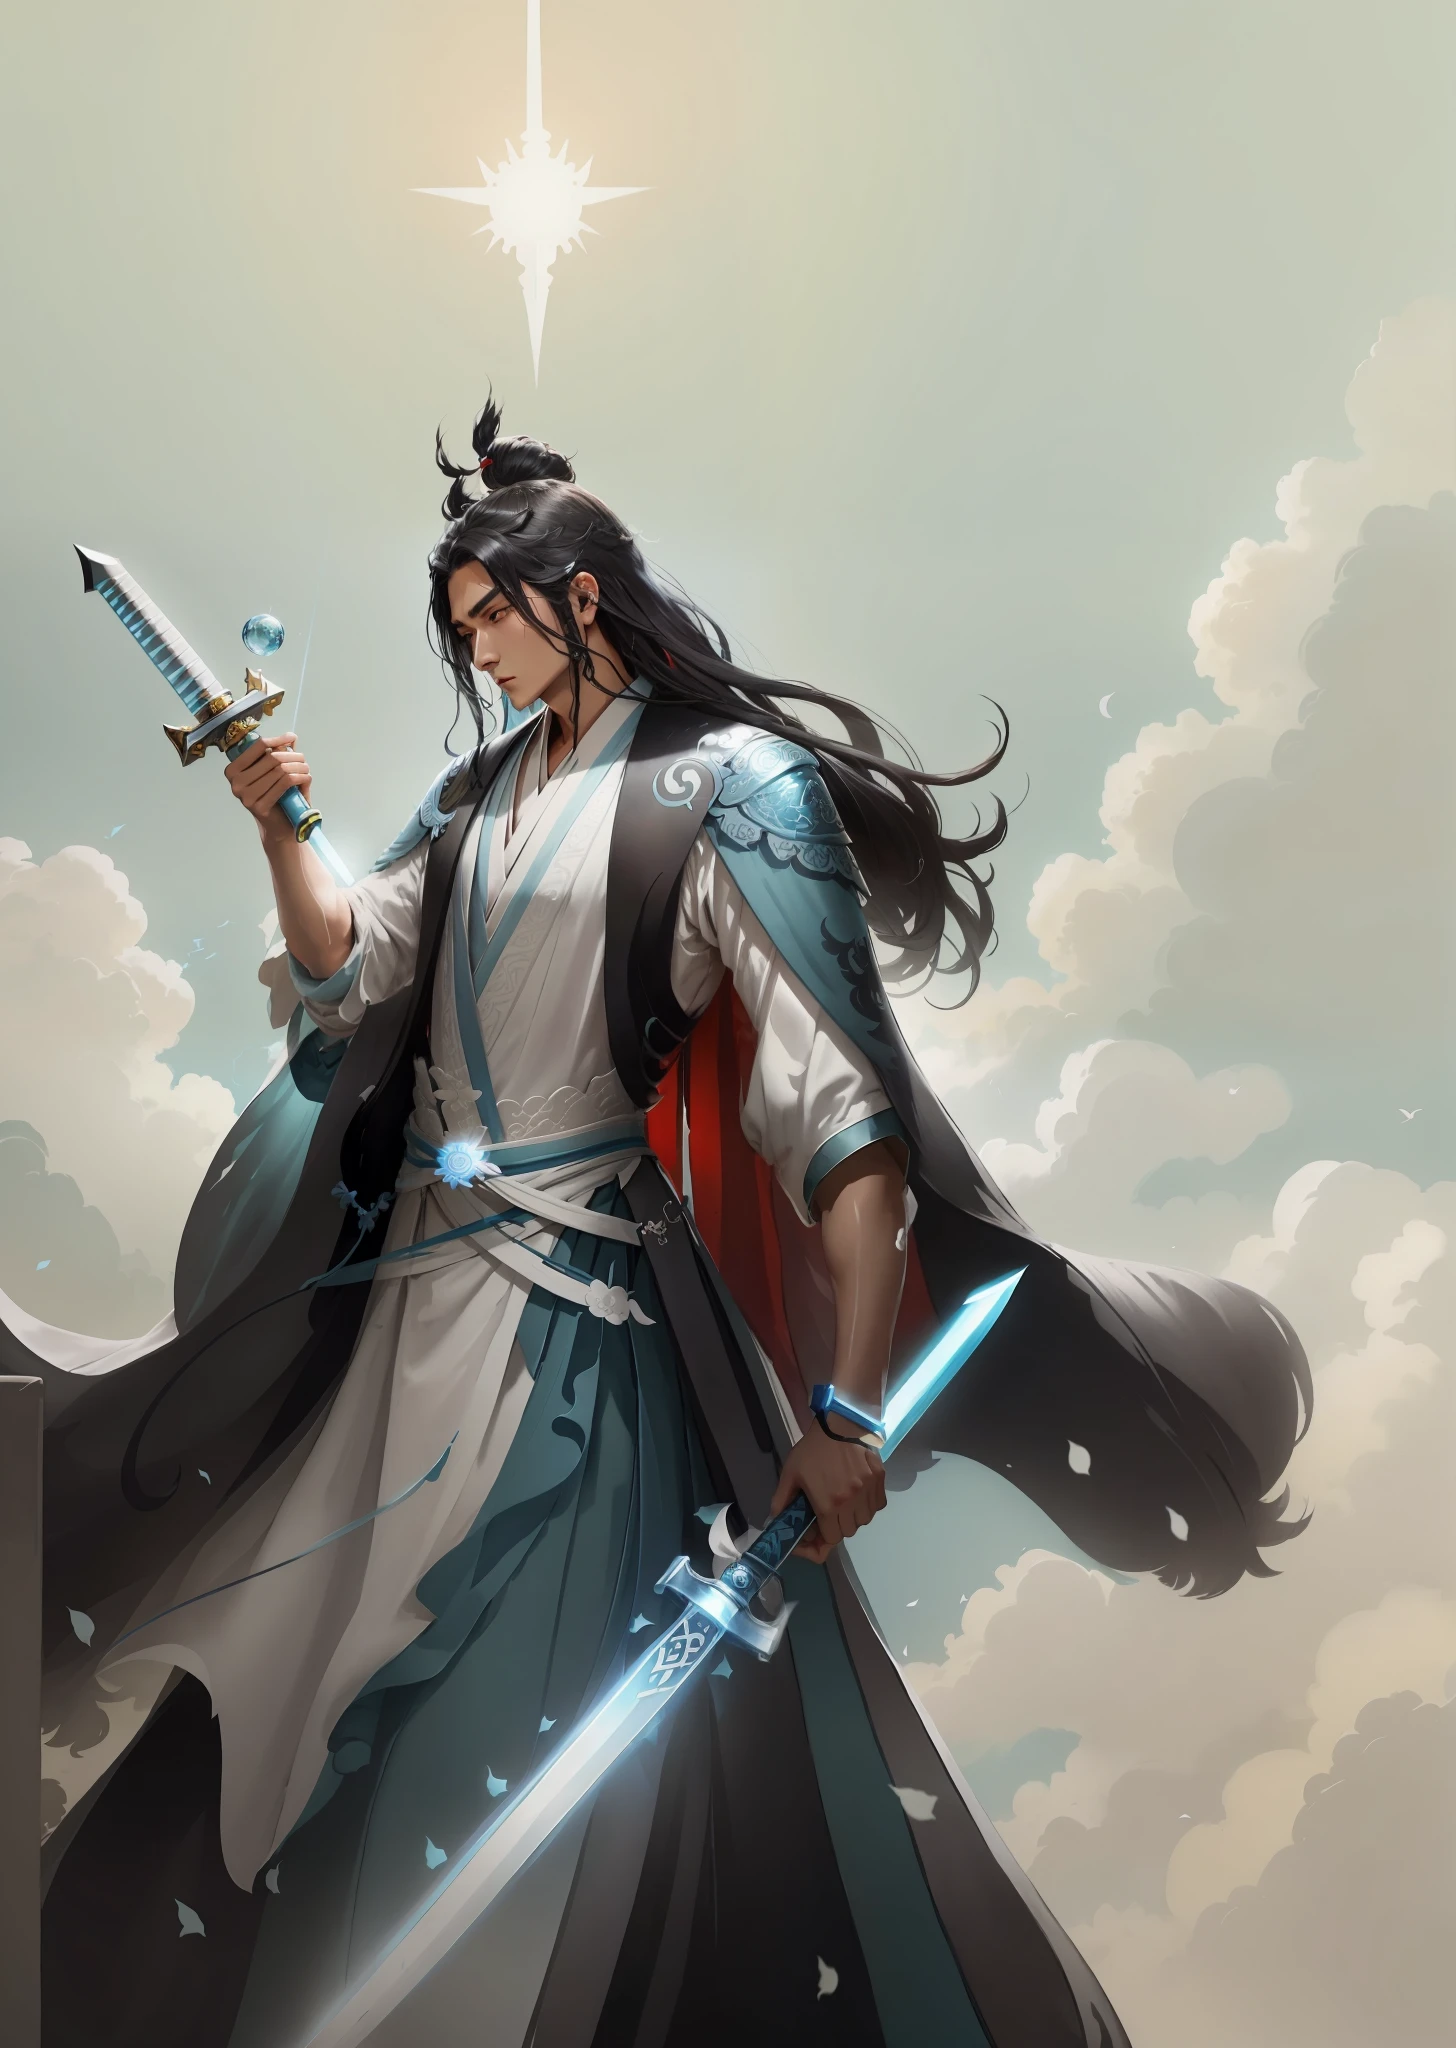 Image of a young beautiful man wearing a light blue robe, holding a sword, flowing hair and a robe, with firm eyes, Yang J, black hair, white background, inspired by Guan Daosheng, inspired by Cao Zhibai, inspired by Zhao Yuan, inspired by Zhu Derun, swordsman, inspired by Wu Daozi, inspired by Bian Shoumin, inspired by Huang Shen